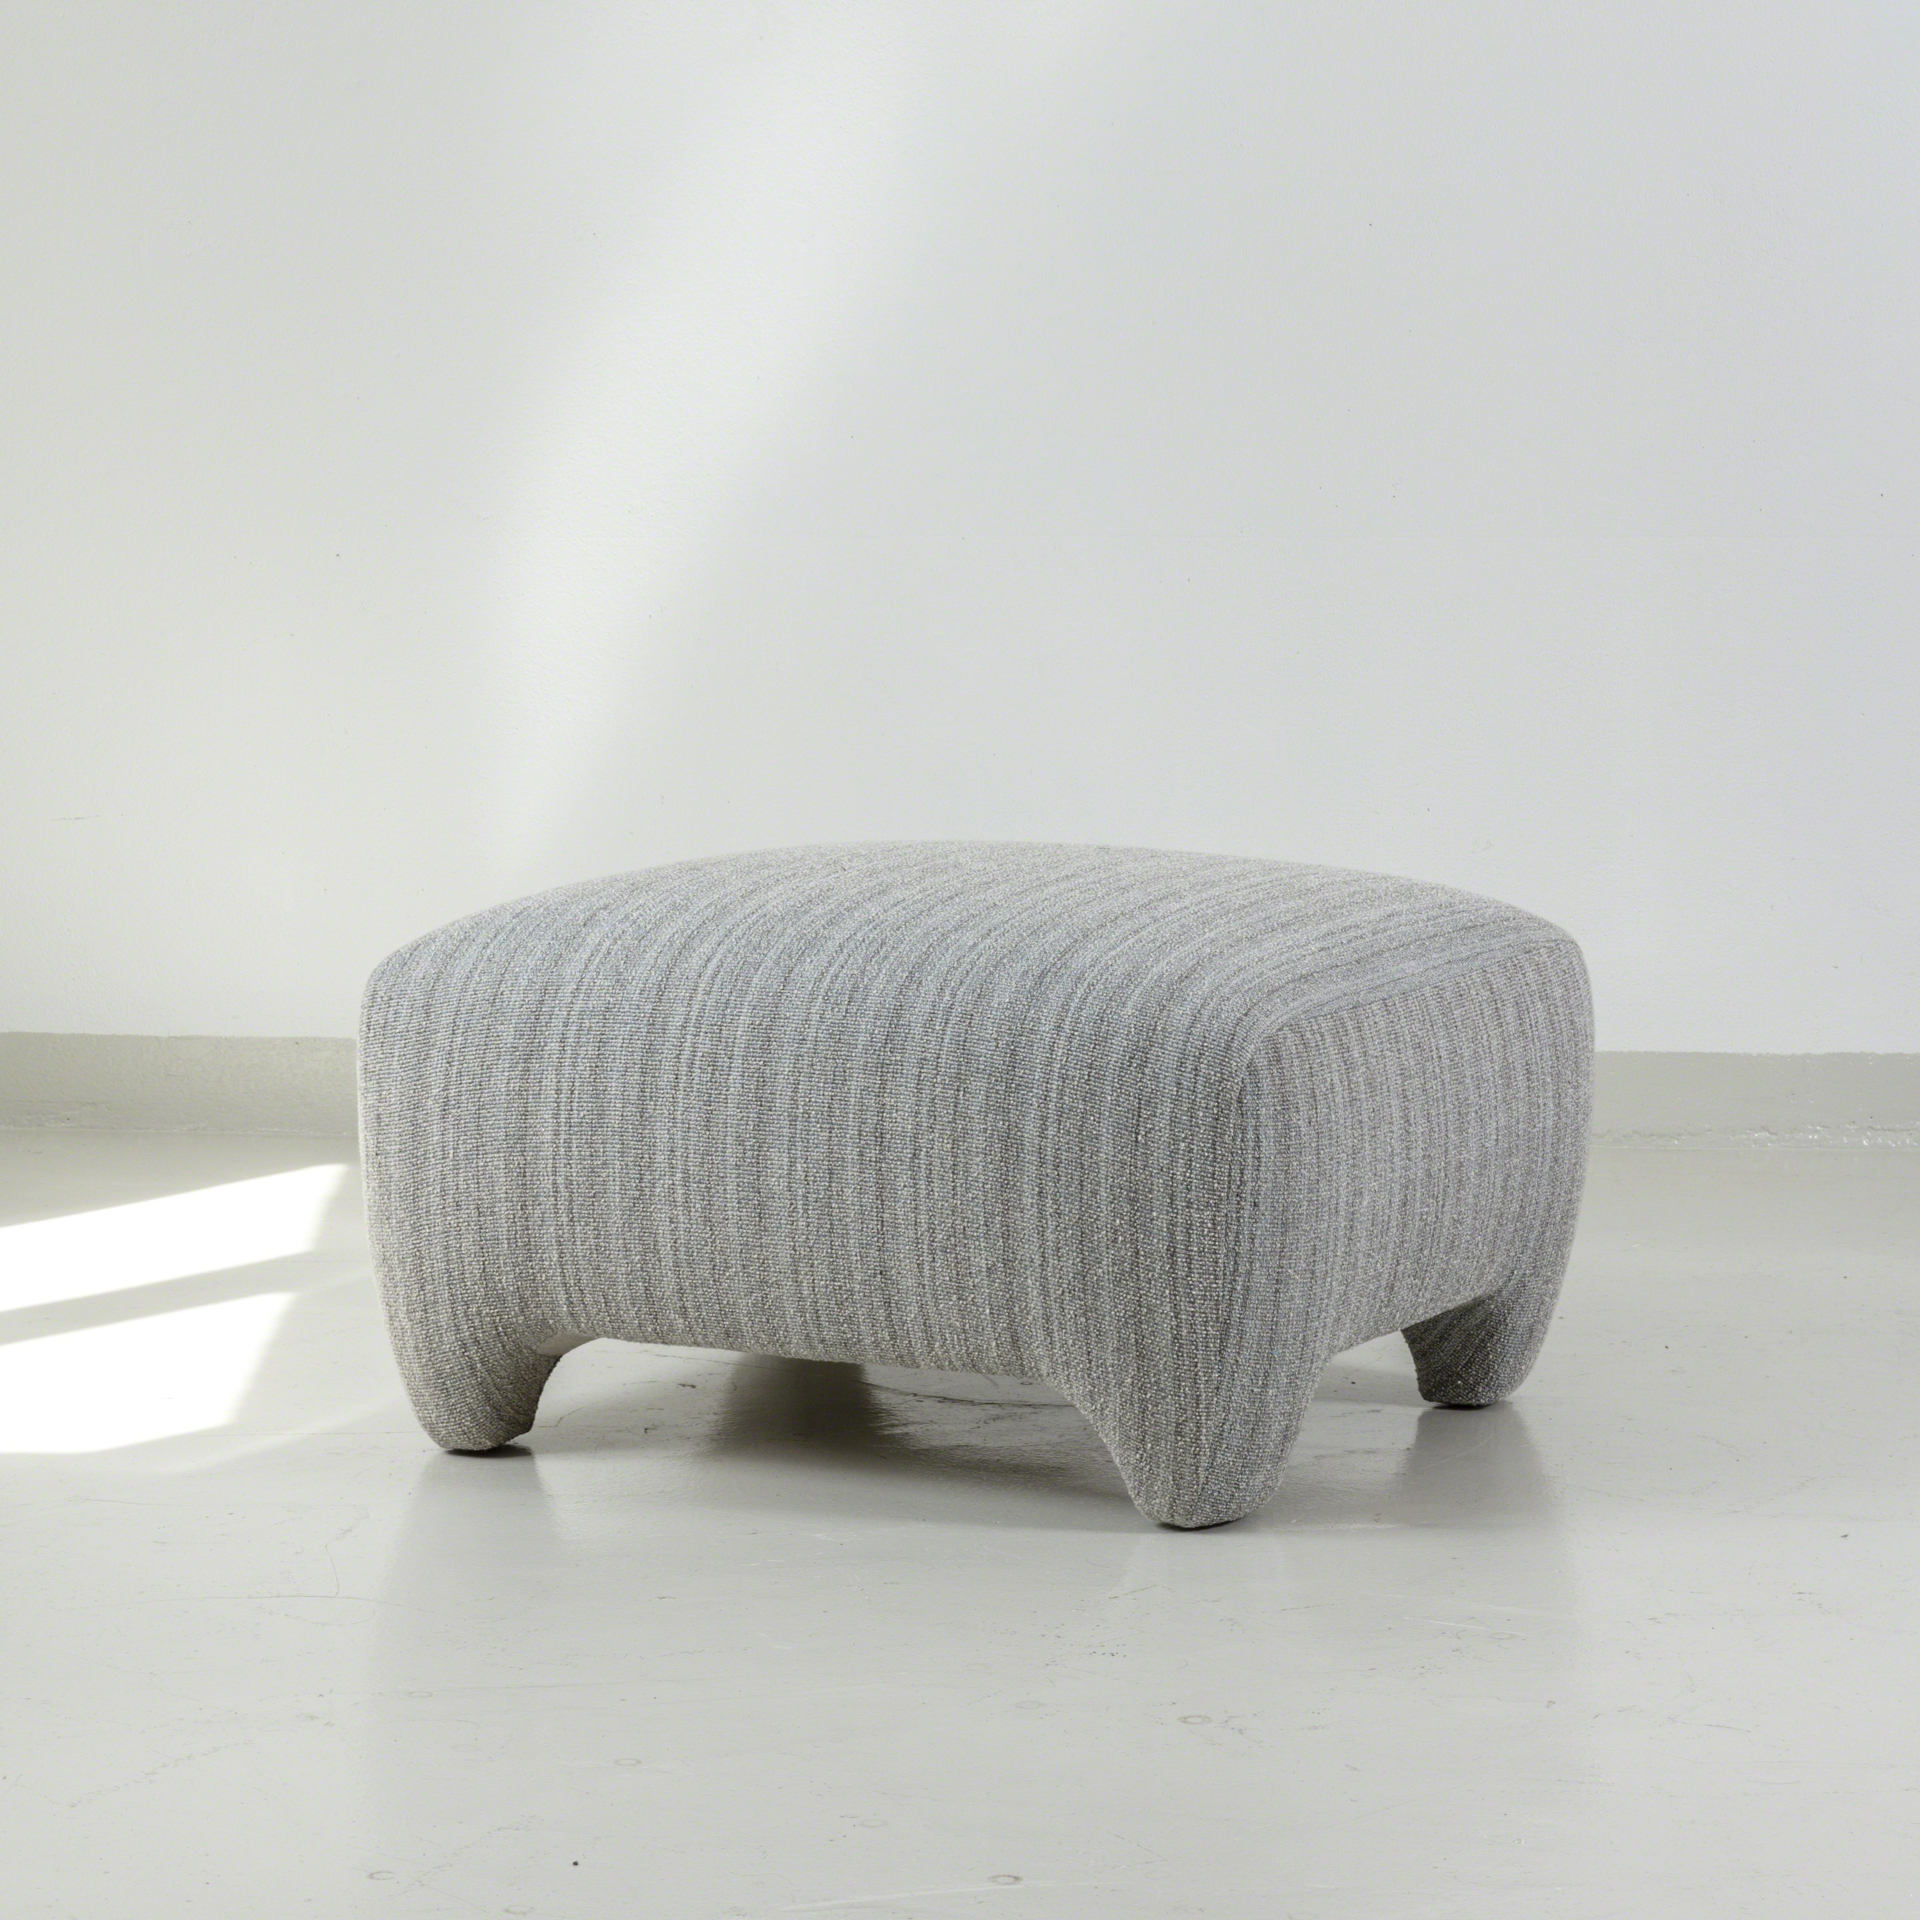 Slipper chair and ottoman by Tinatin Kilaberidze